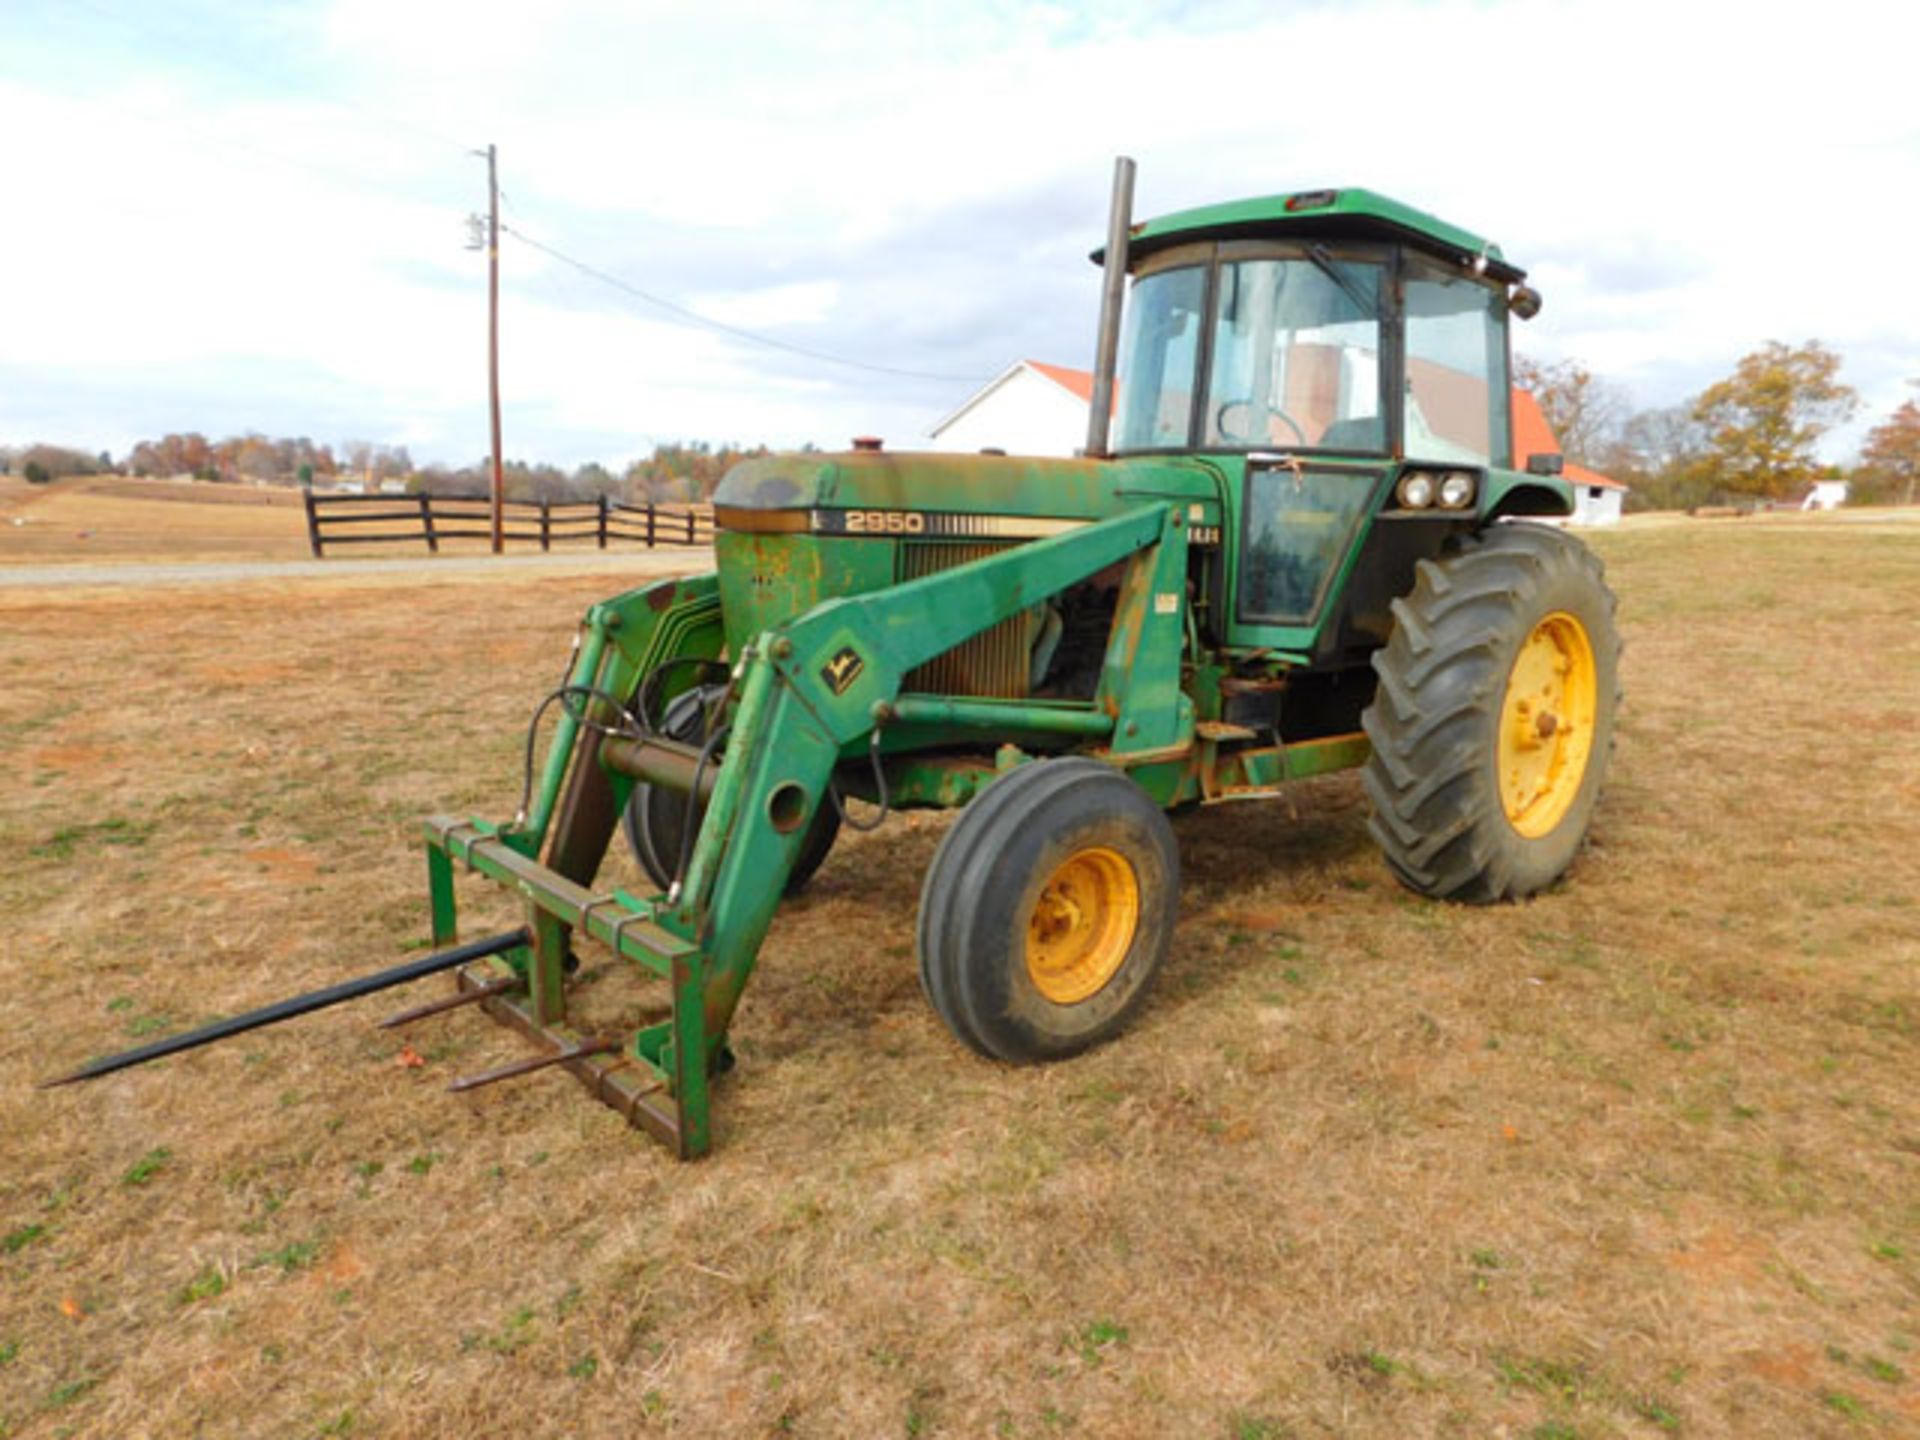 John Deere 2950 Tractor 2WD, Cab Kit, 2-remotes, PTO, w/ front end loader, 1,770 hrs.